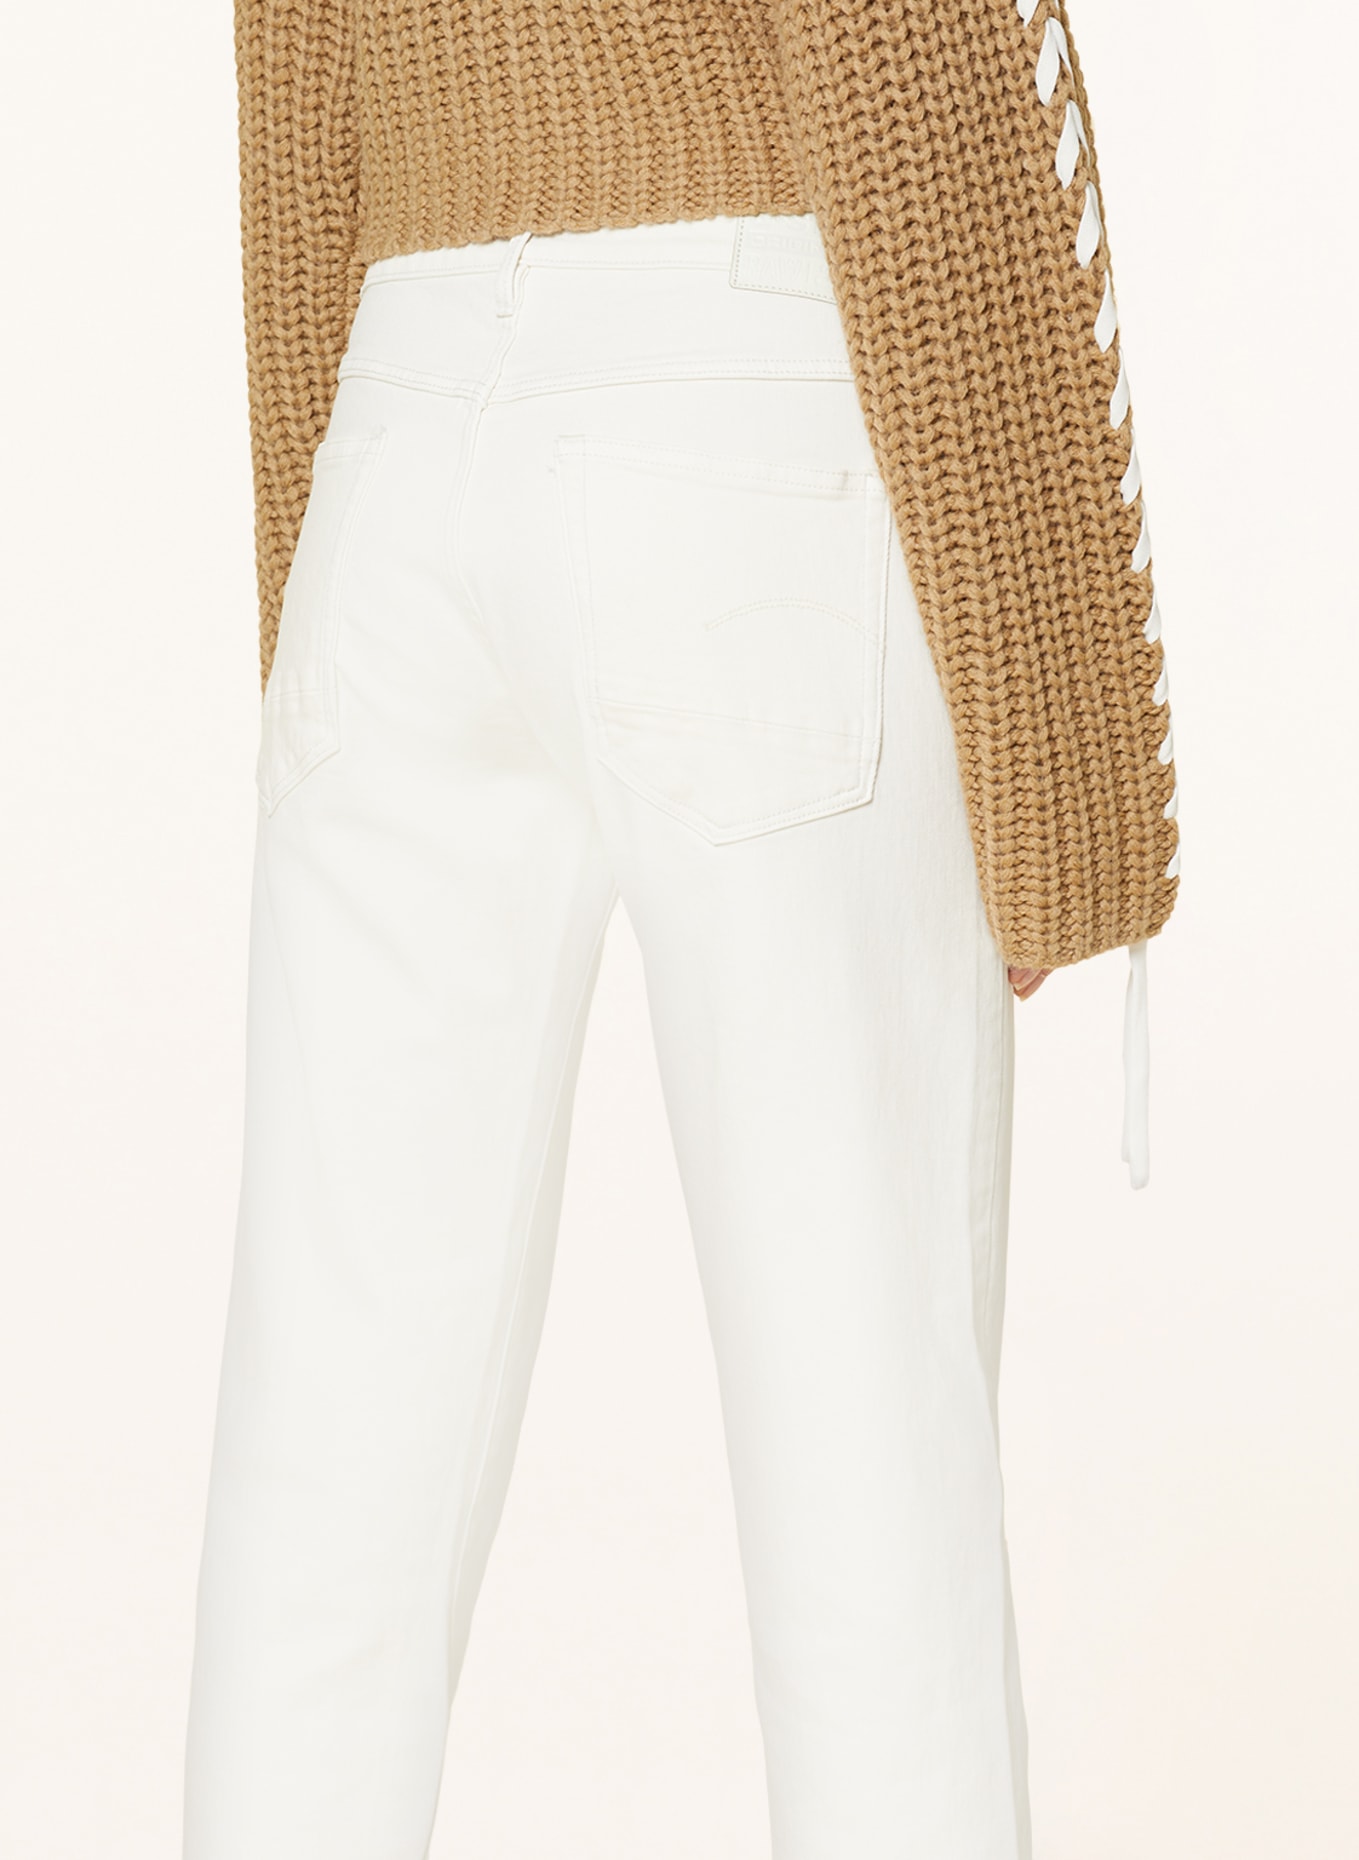 G-Star RAW 7/8 jeans KATE, Color: G547 paper white gd (Image 5)